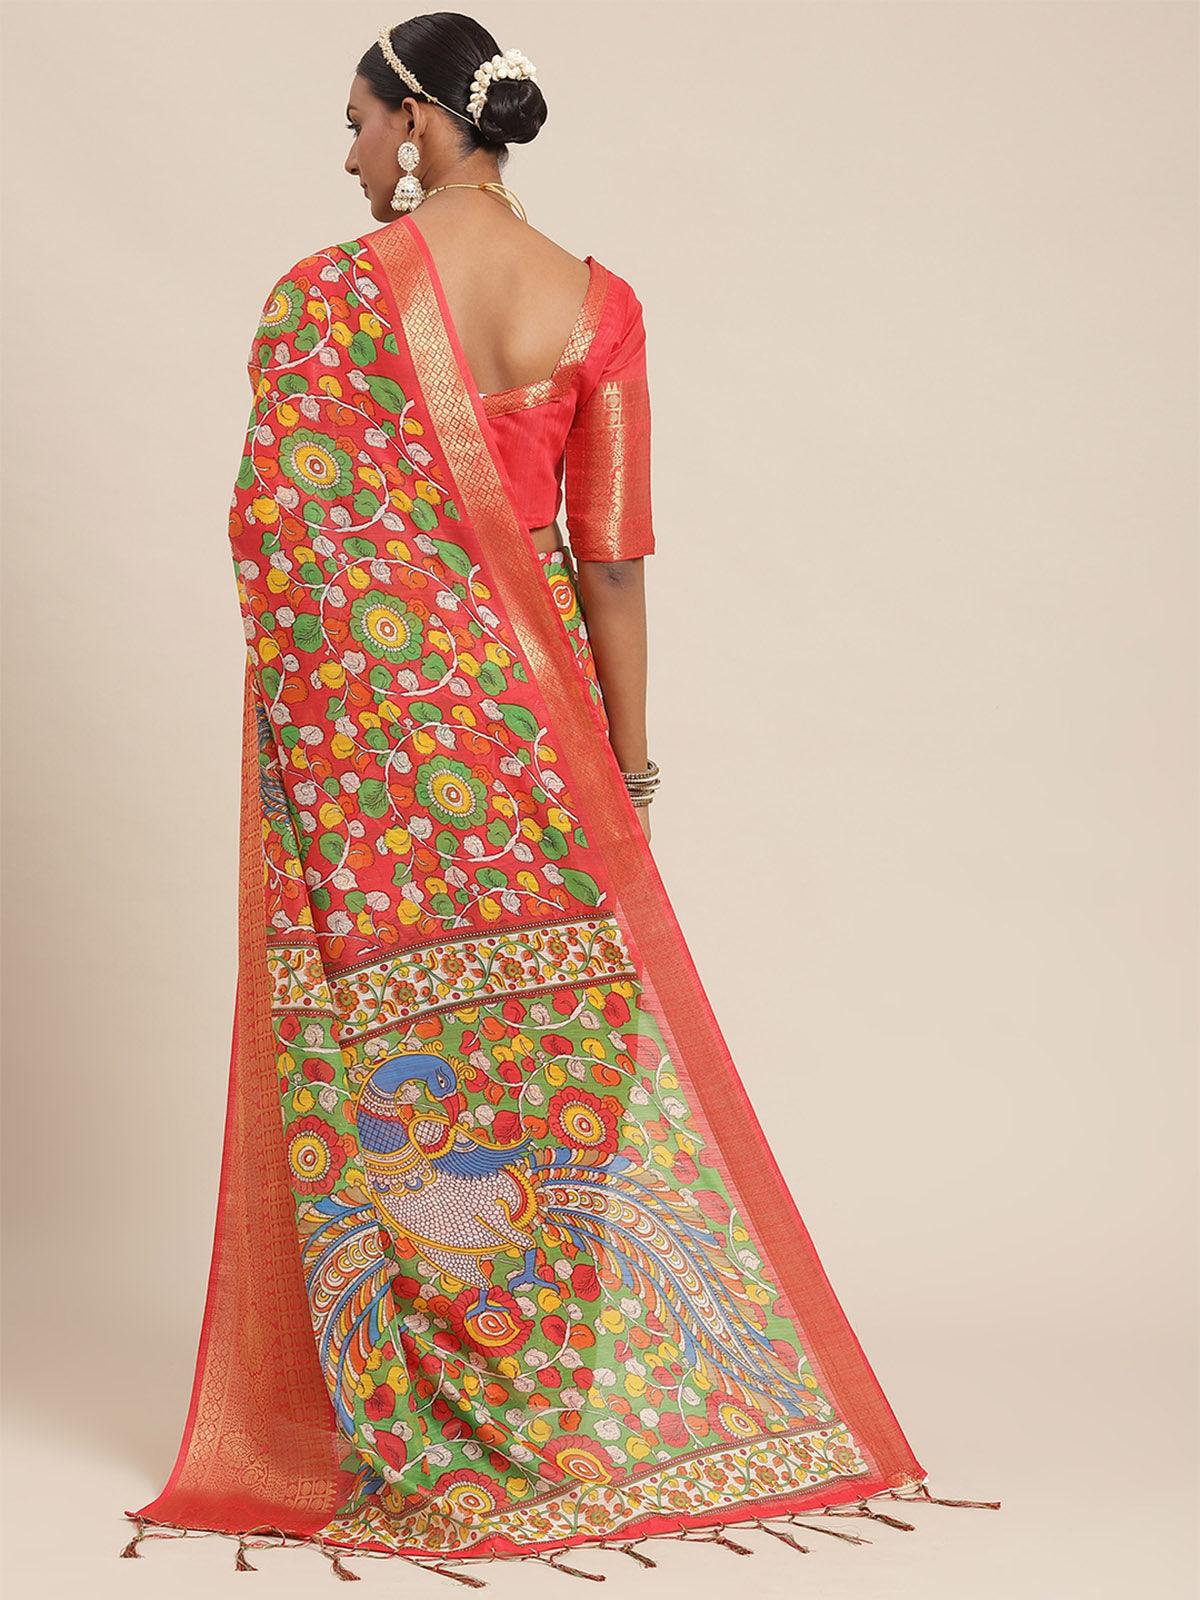 Women's Cotton Blend Red Printed Designer Saree With Blouse Piece - Odette